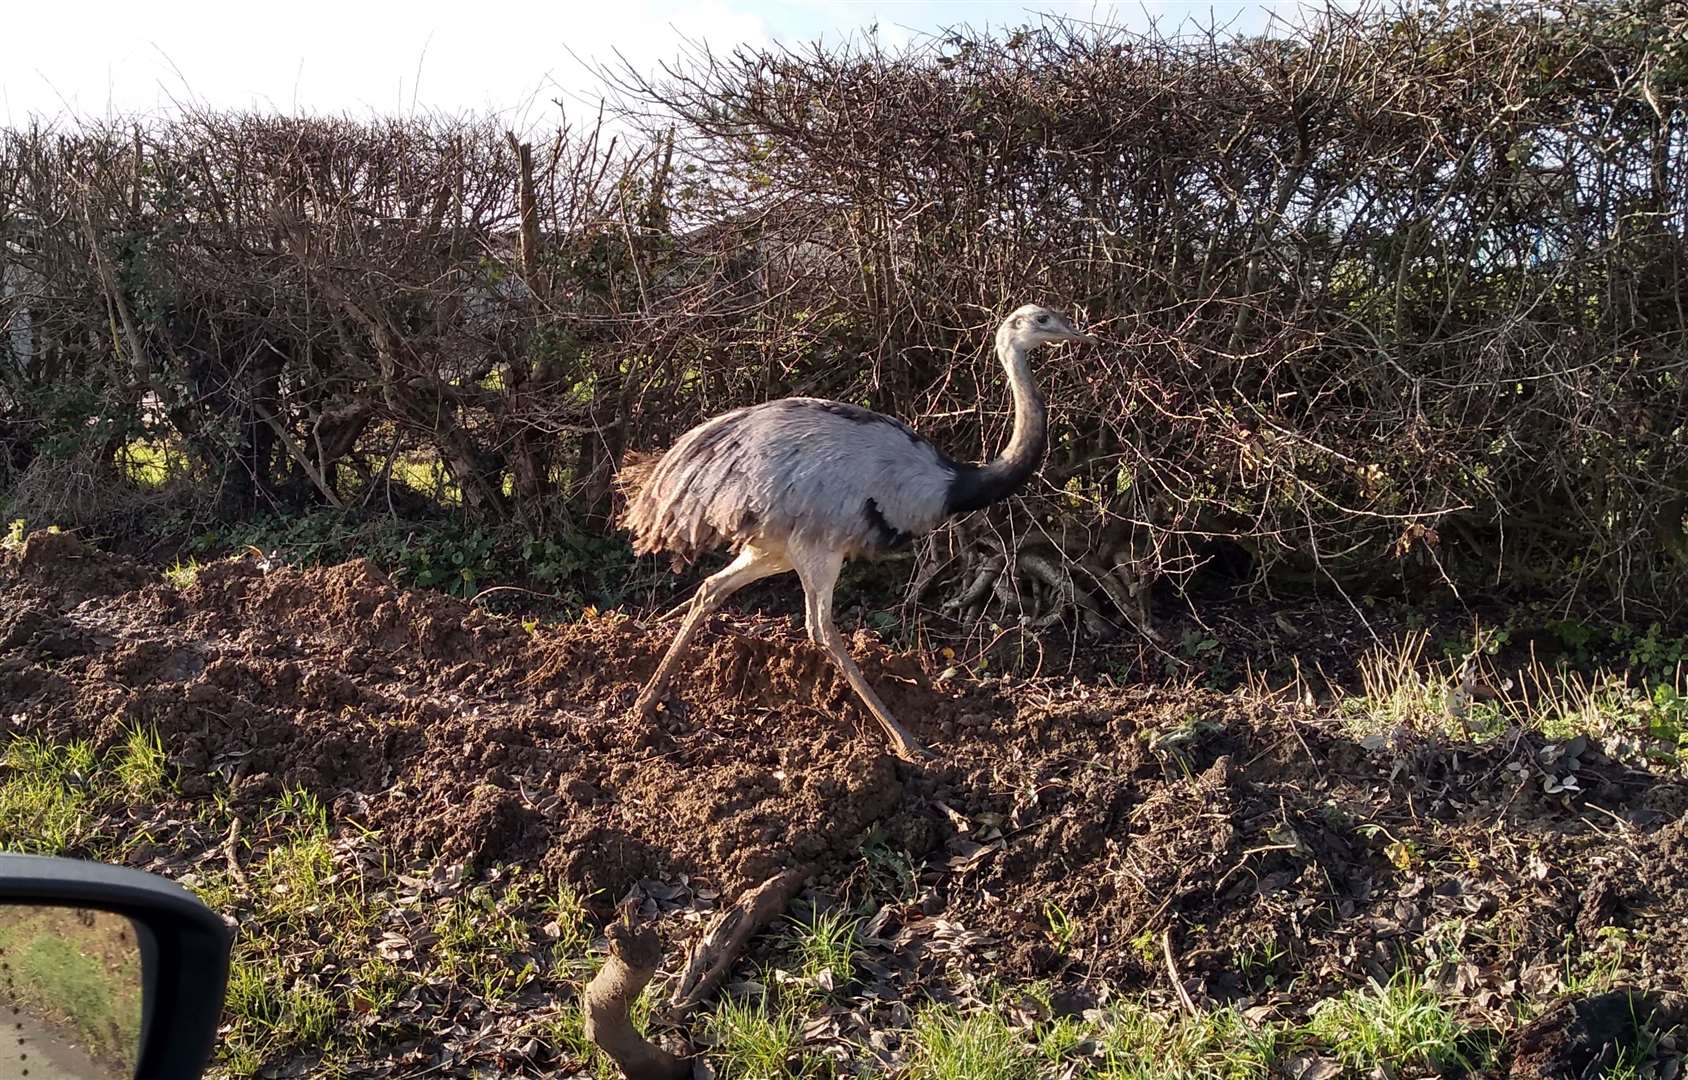 A rhea also caused queues after it escaped from a Sittingbourne field in December 2019. Photo: Adrian Gombault